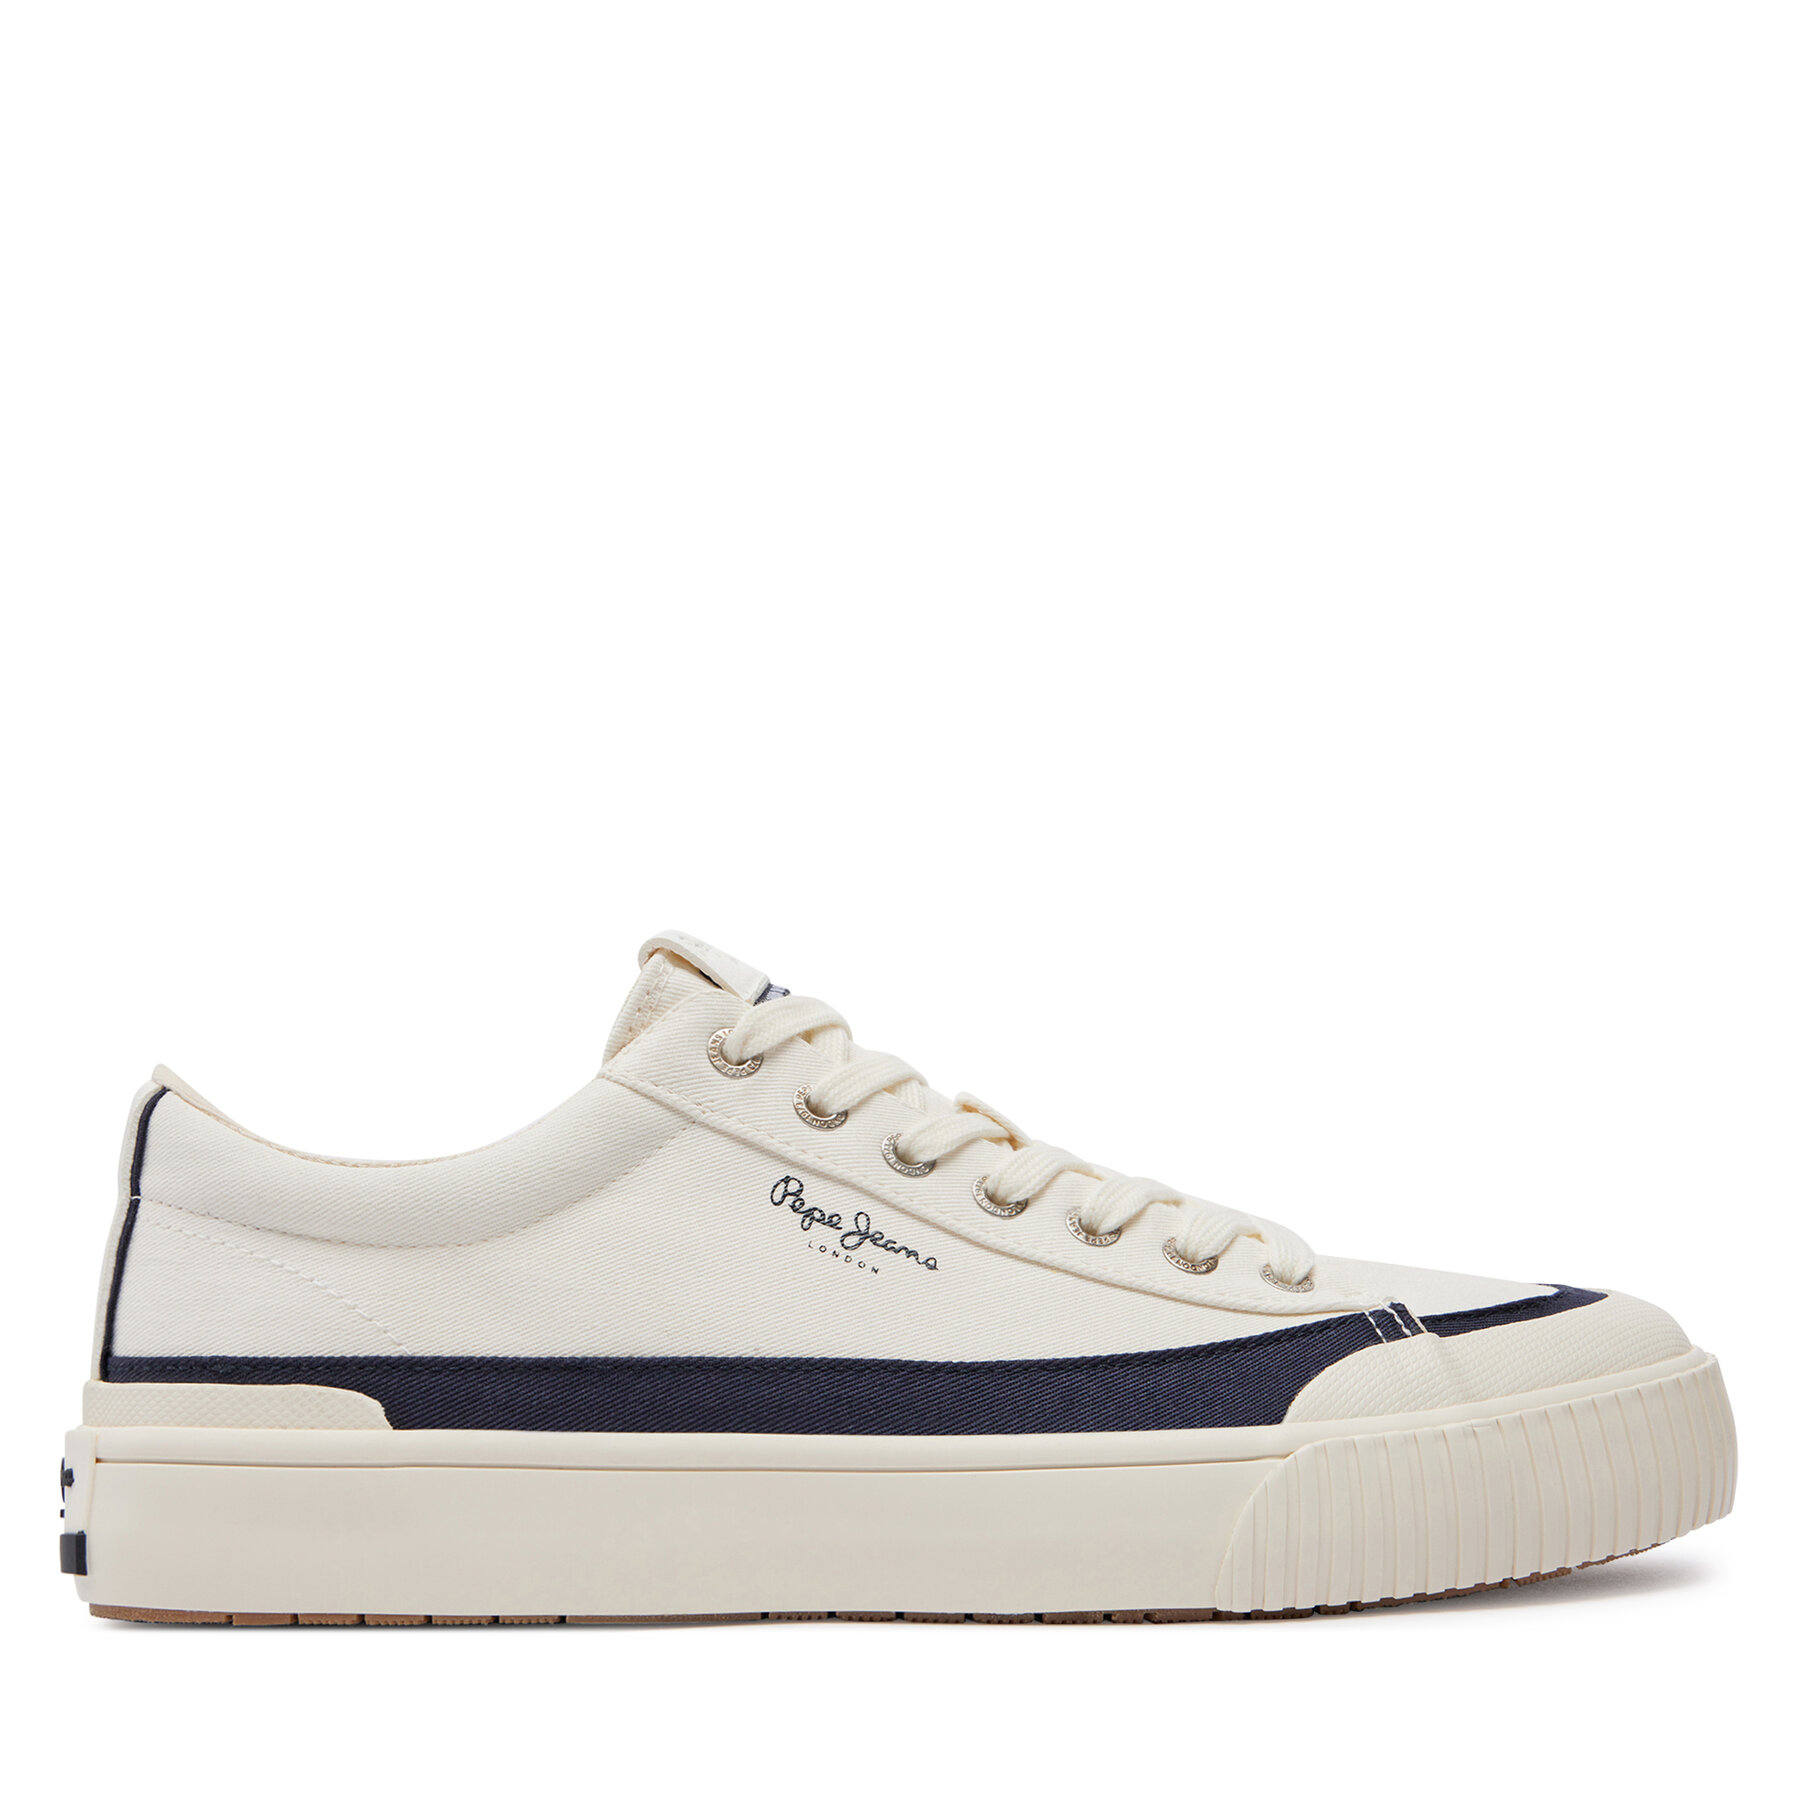 Sneakers aus Stoff Pepe Jeans Ben Band M PMS31043 White 800 von Pepe Jeans